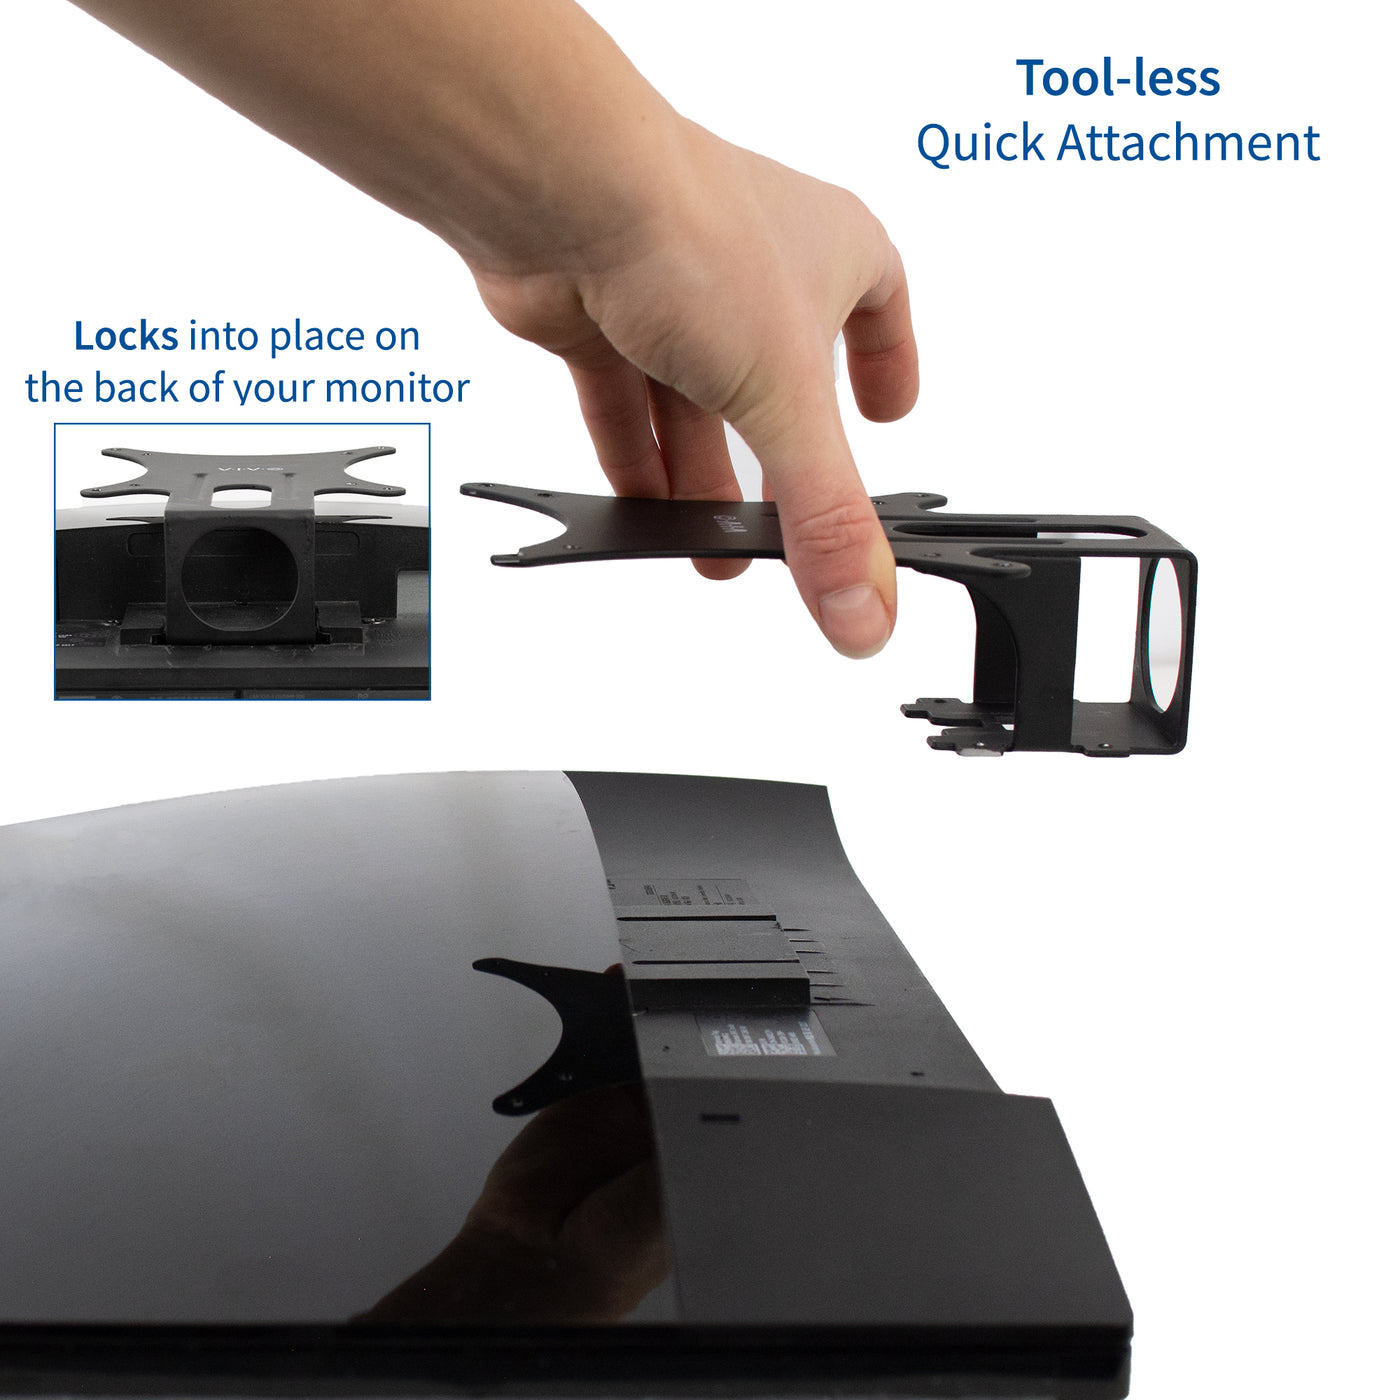 Tool-less attachment option with quick attach feature.